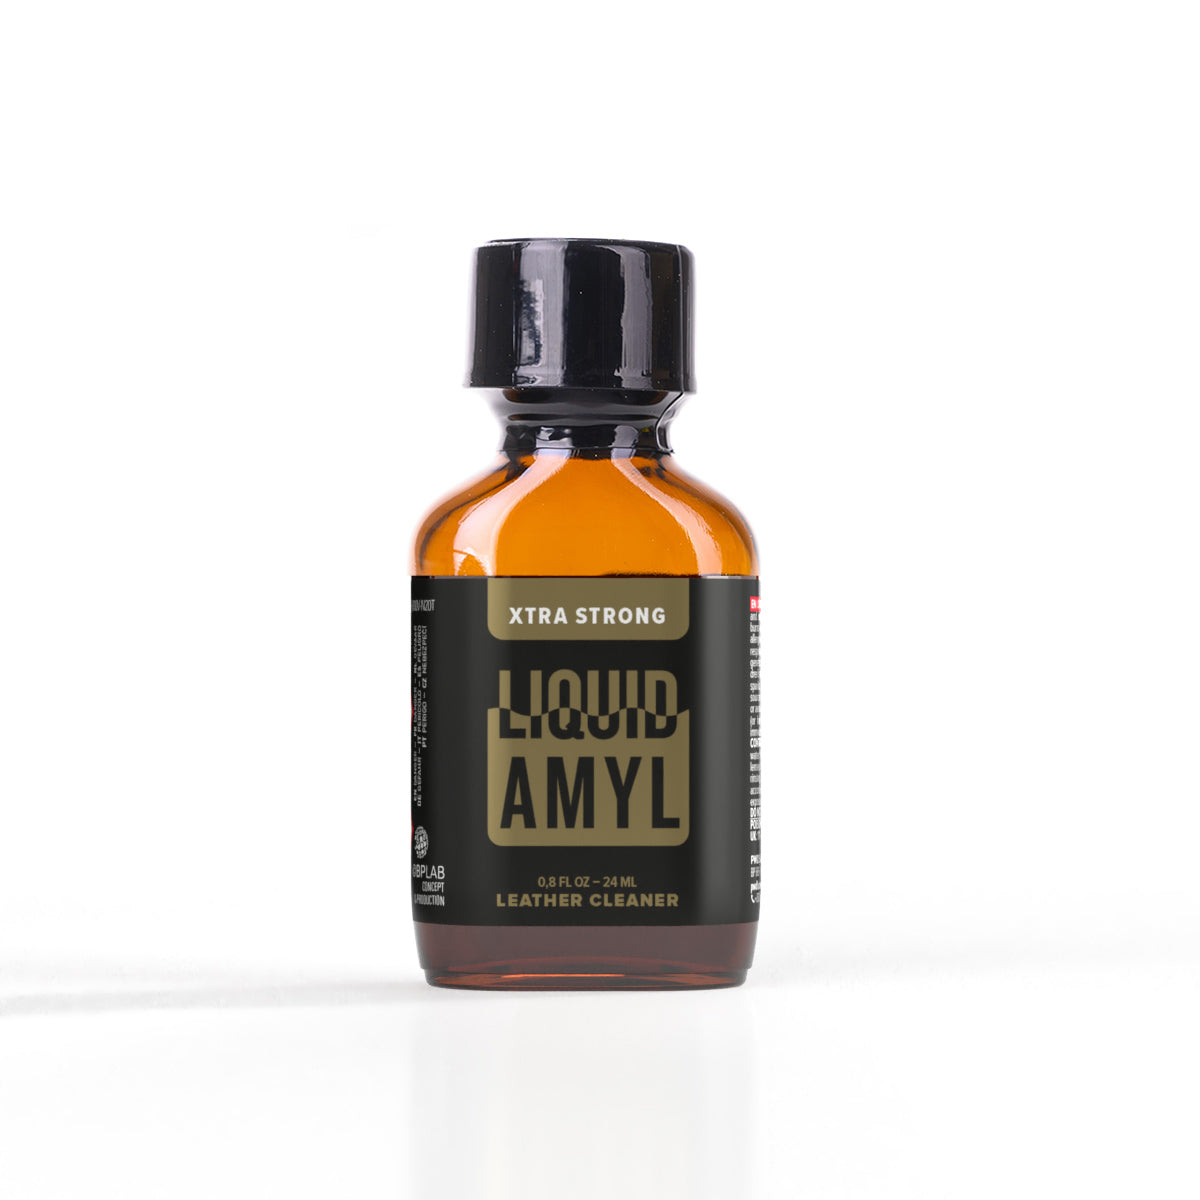 A product photo of a bottle of Liquid Amyl Poppers.